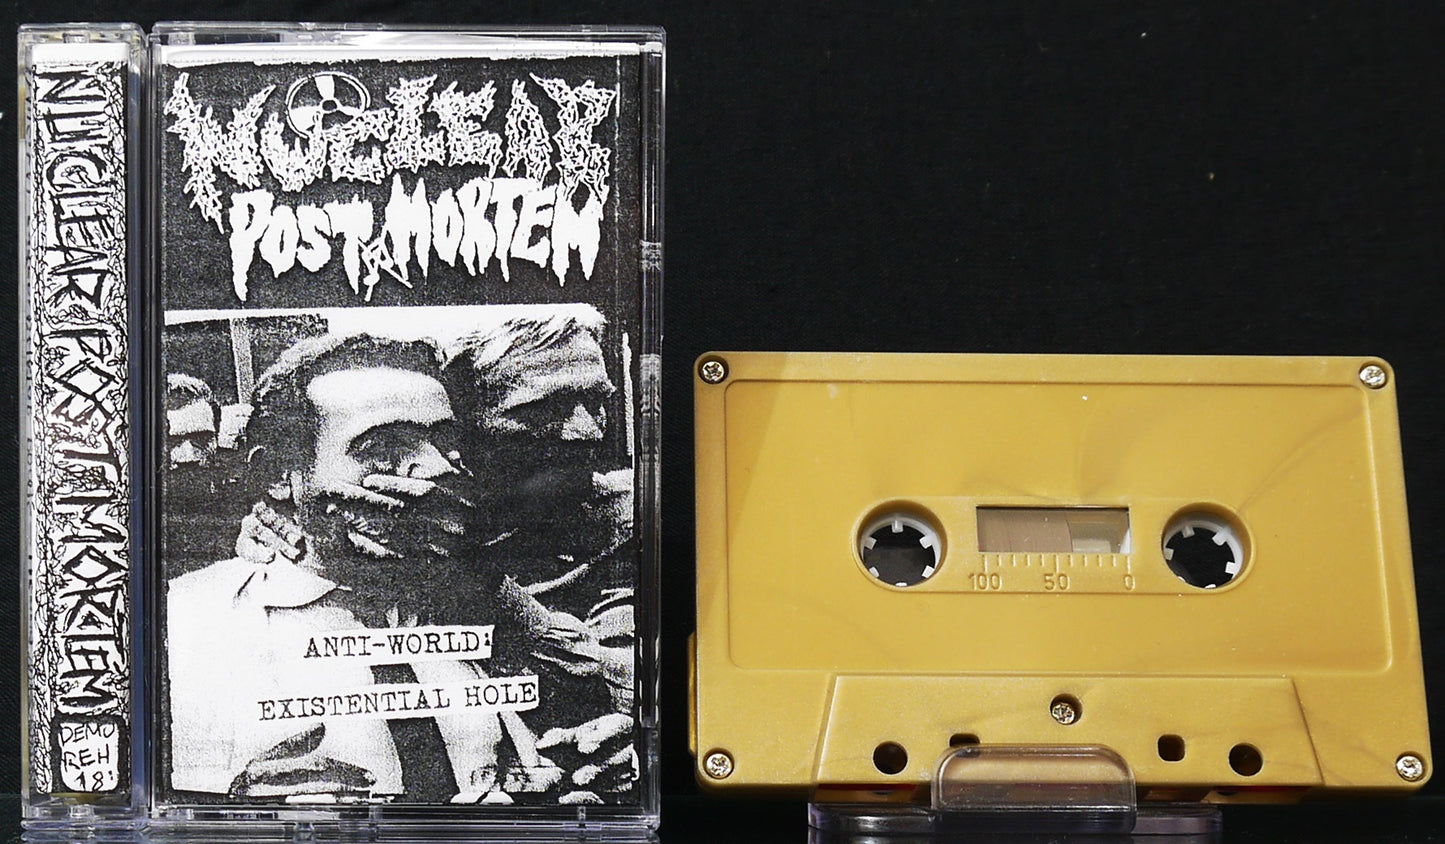 NUCLEAR POSTMORTEM - Anti-World Existential Hole MC Tape